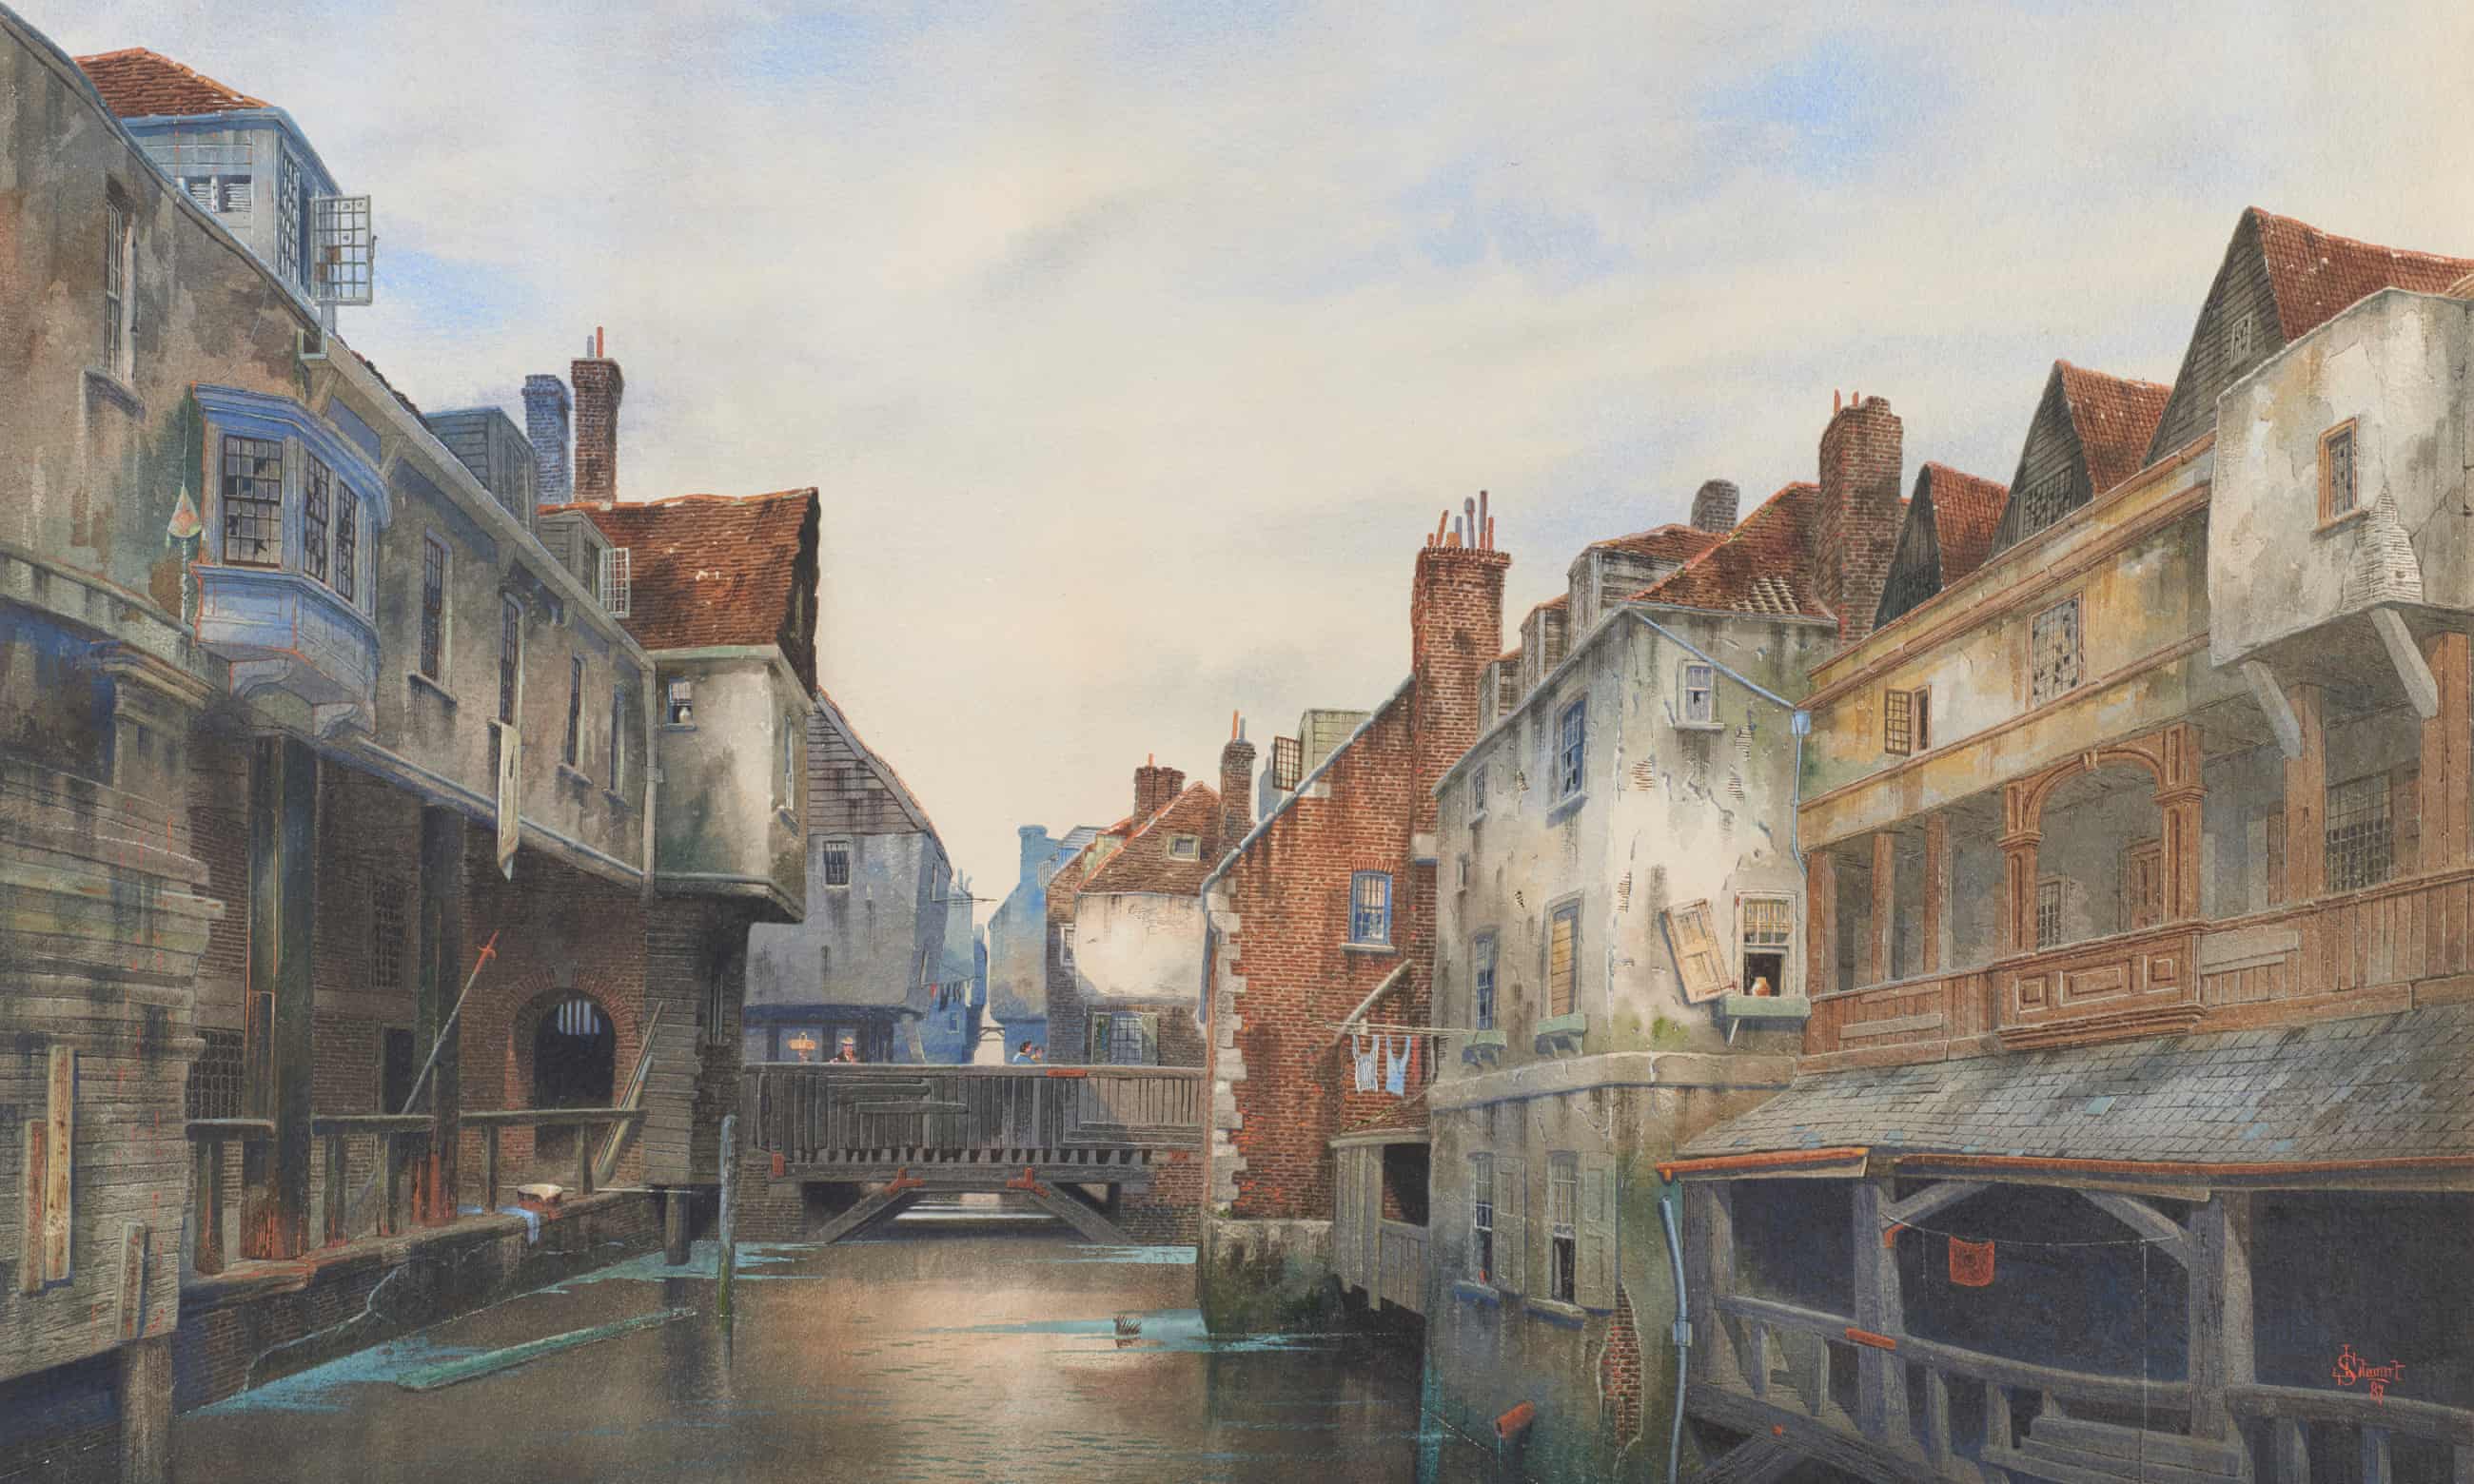 A painting of one of London's lost rivers.